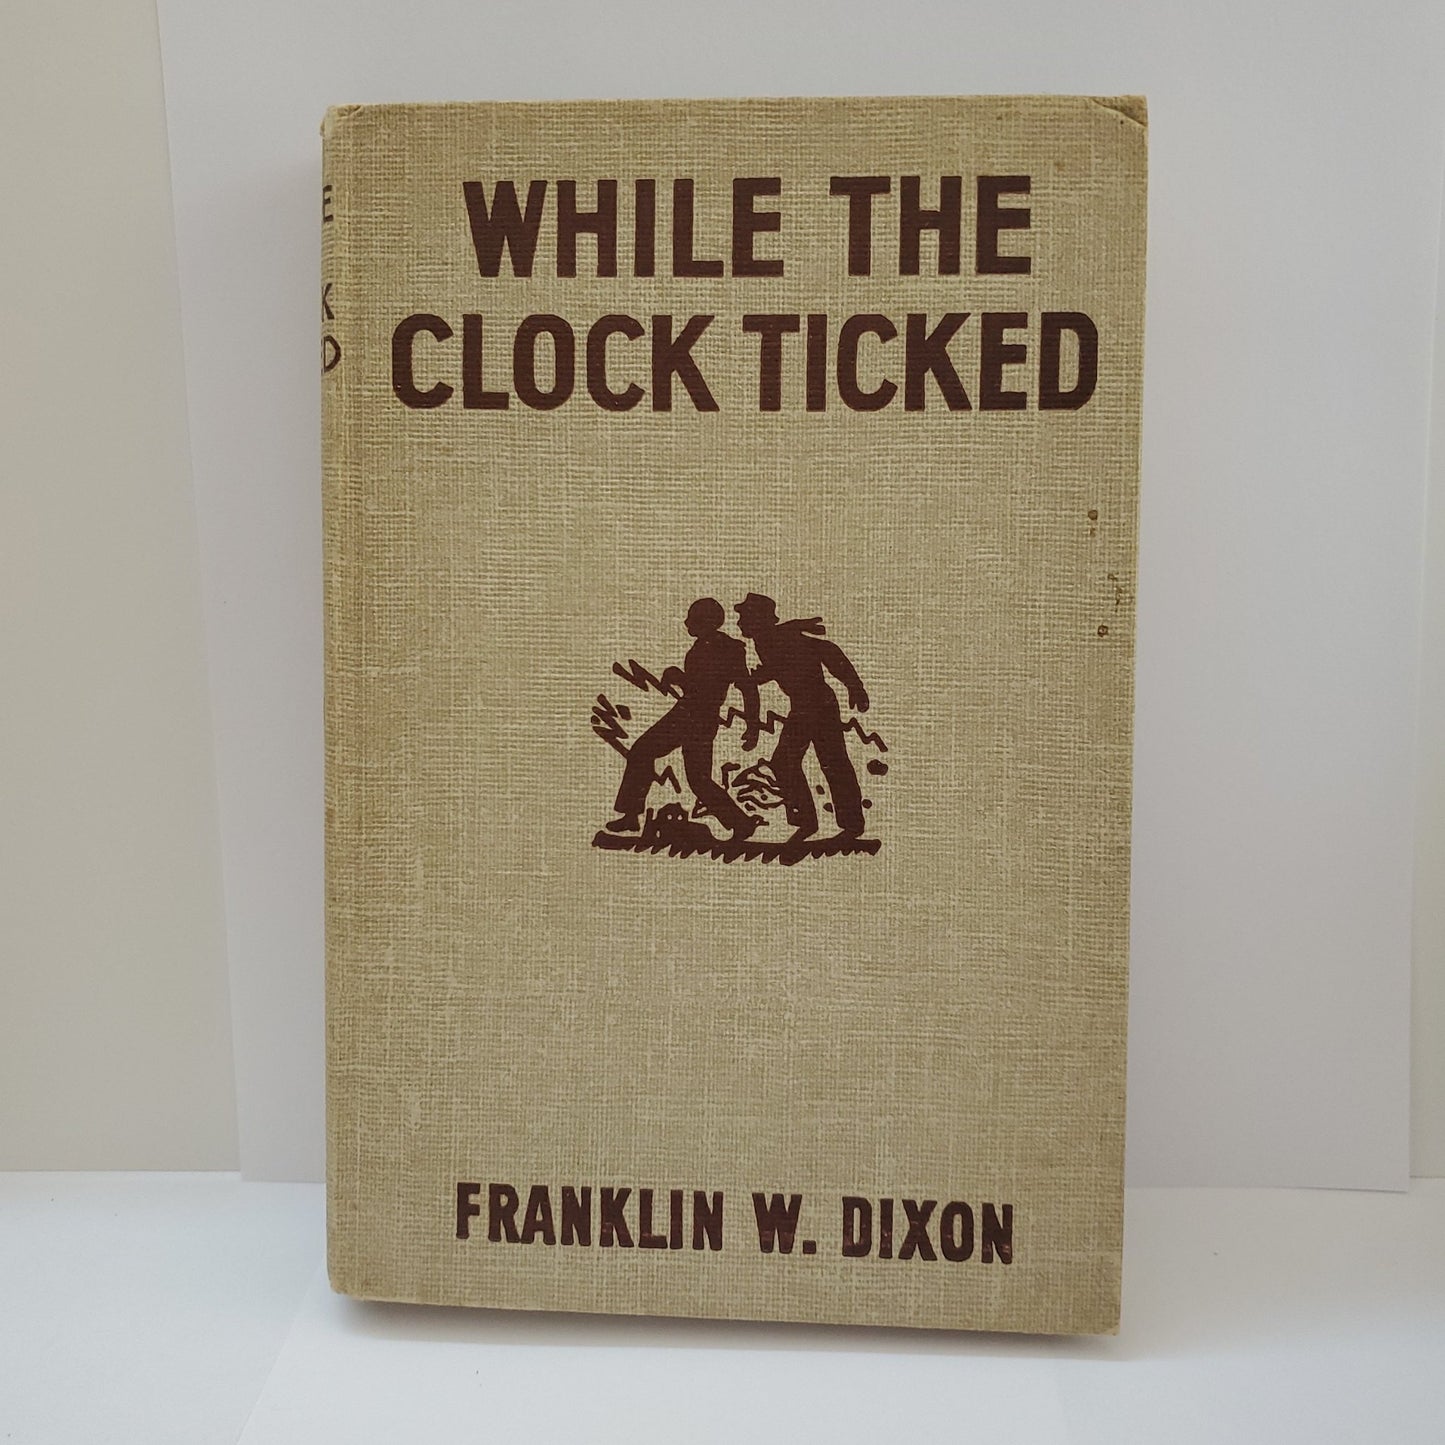 While the Clock Ticked - [ash-ling] Booksellers